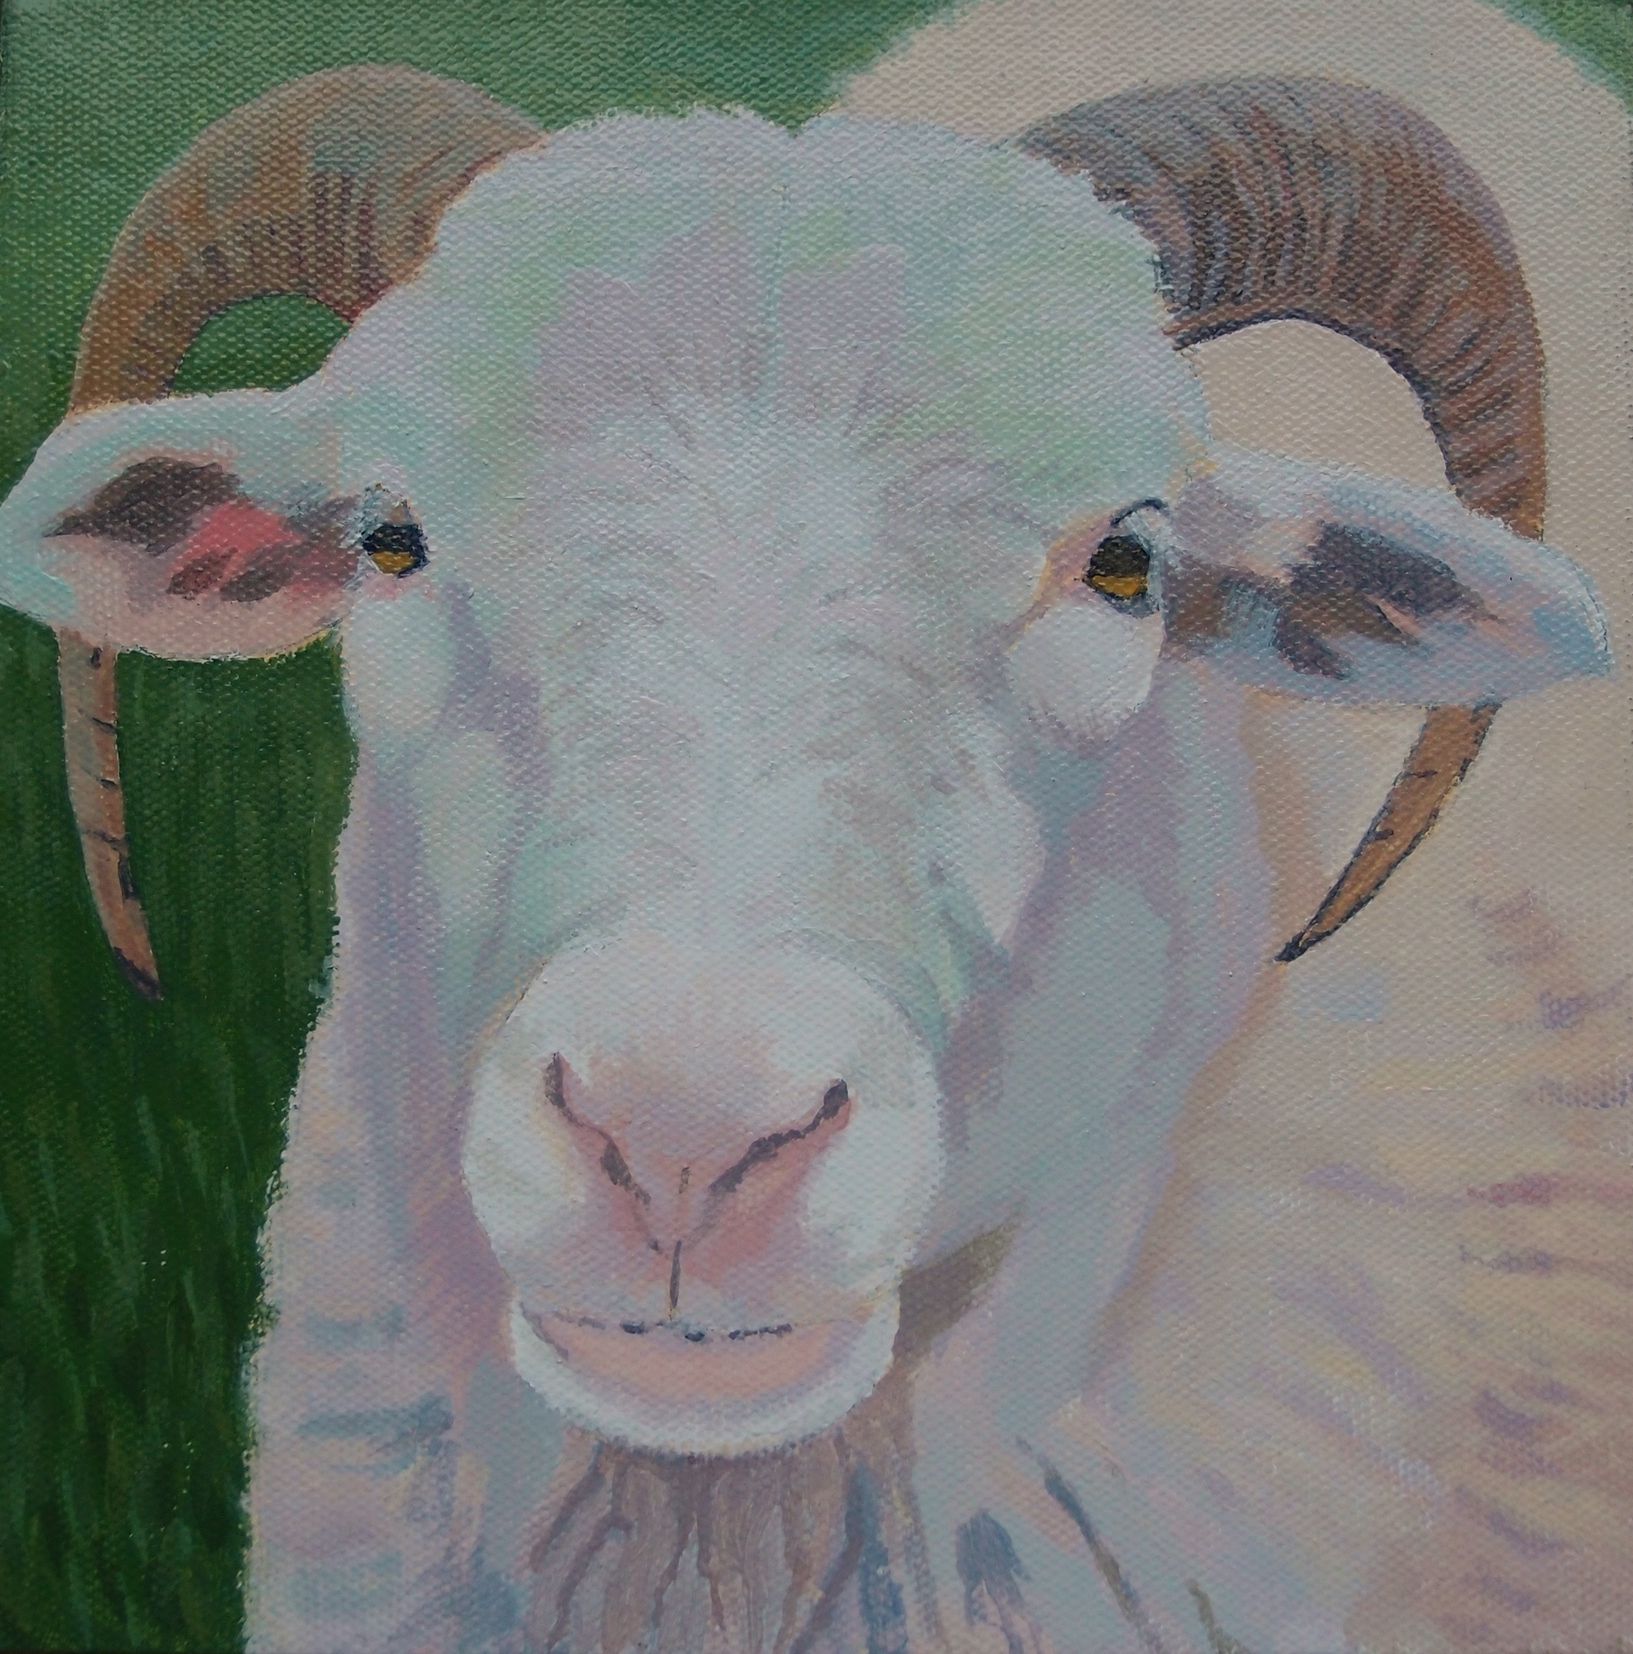 Only Ewe by Margaret Crutchley